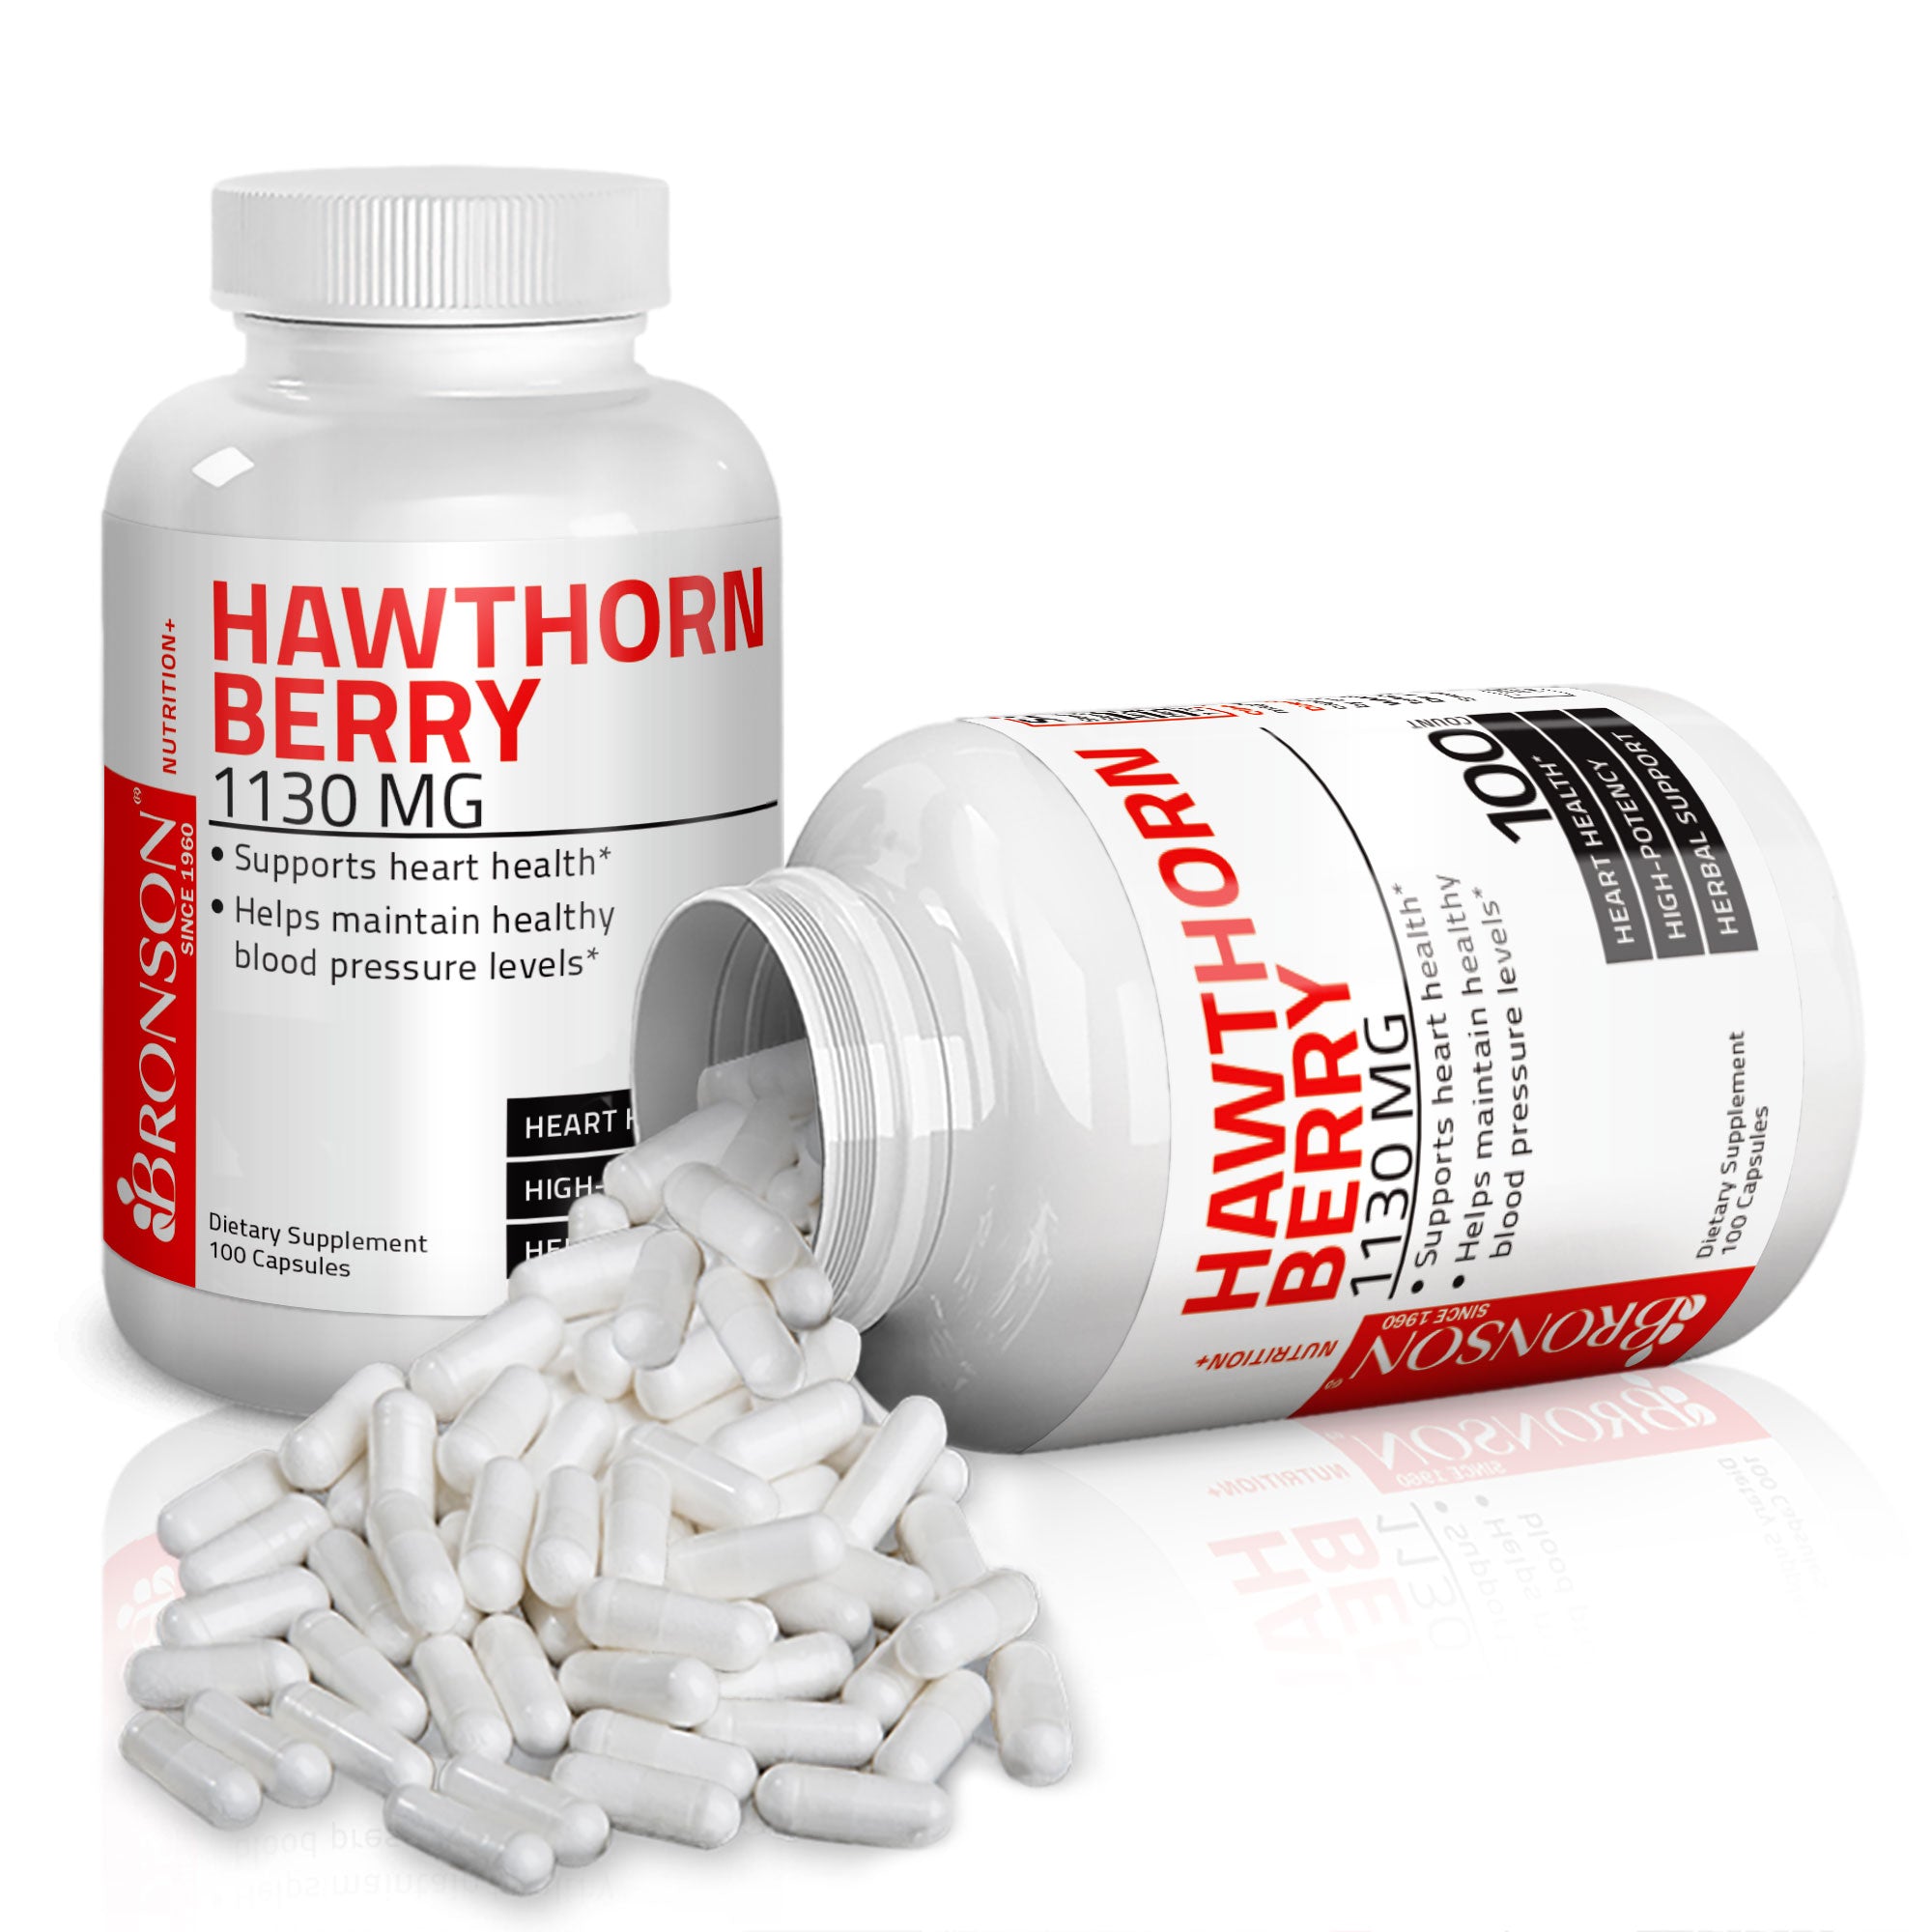 Hawthorn Berry - 1,130 mg - 100 Capsules view 4 of 6